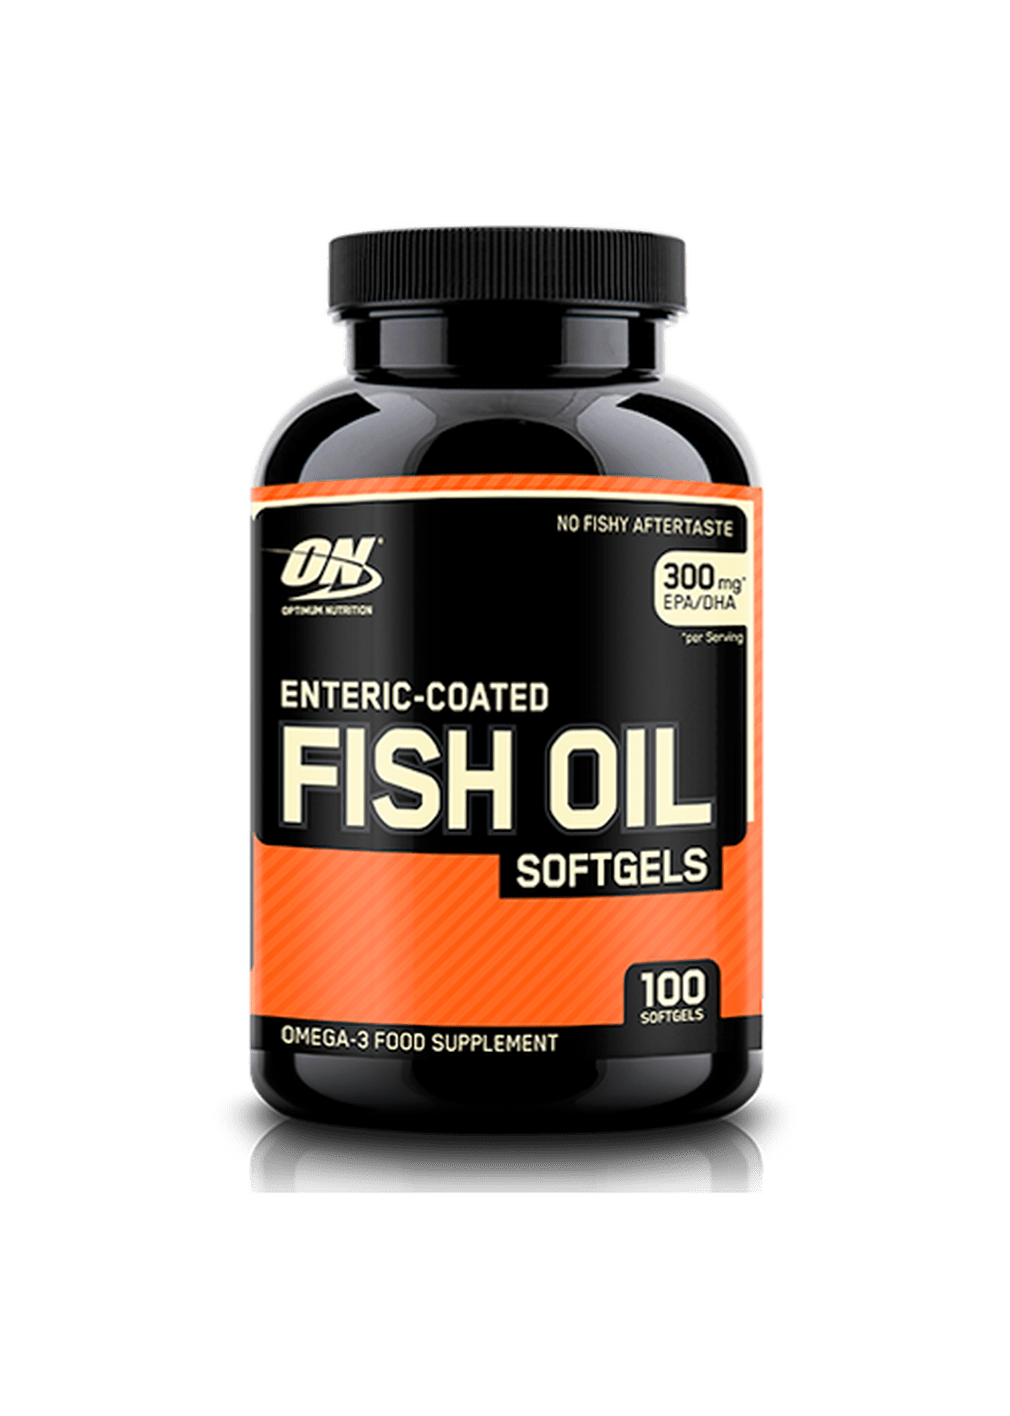 Buy Optimum Nutrition Enteric-Coated Omega-3 Fish Oil Softgels In All Over Lahore Pakistan 2021, Omega3 100 And 200 Softgels Price In Pakistan, www.arnutrition.pk iS The Best Food Supplements Store